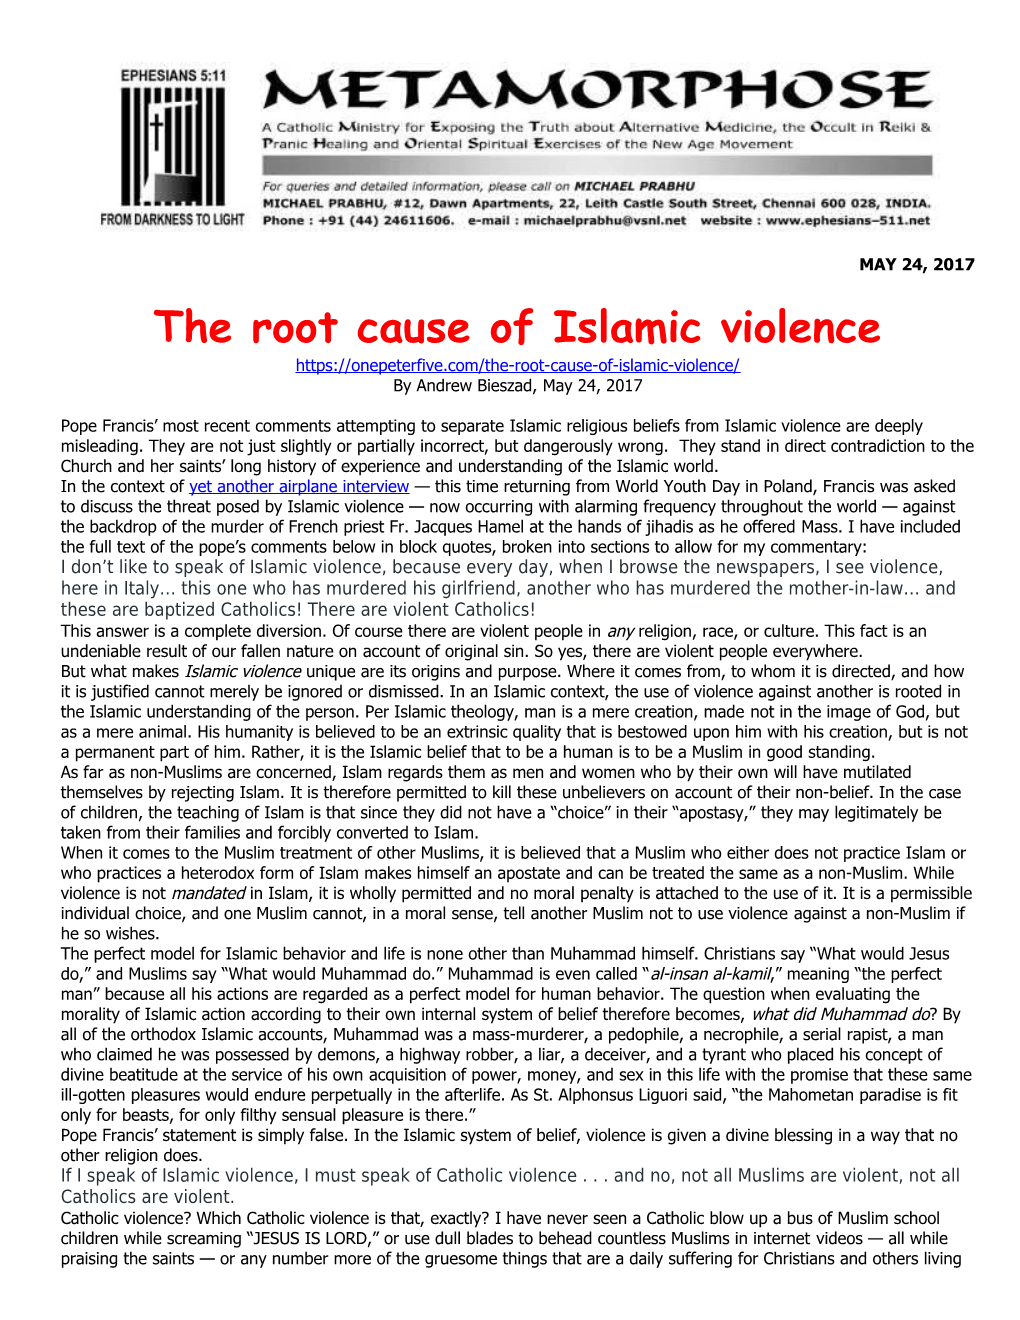 The Root Cause of Islamic Violence